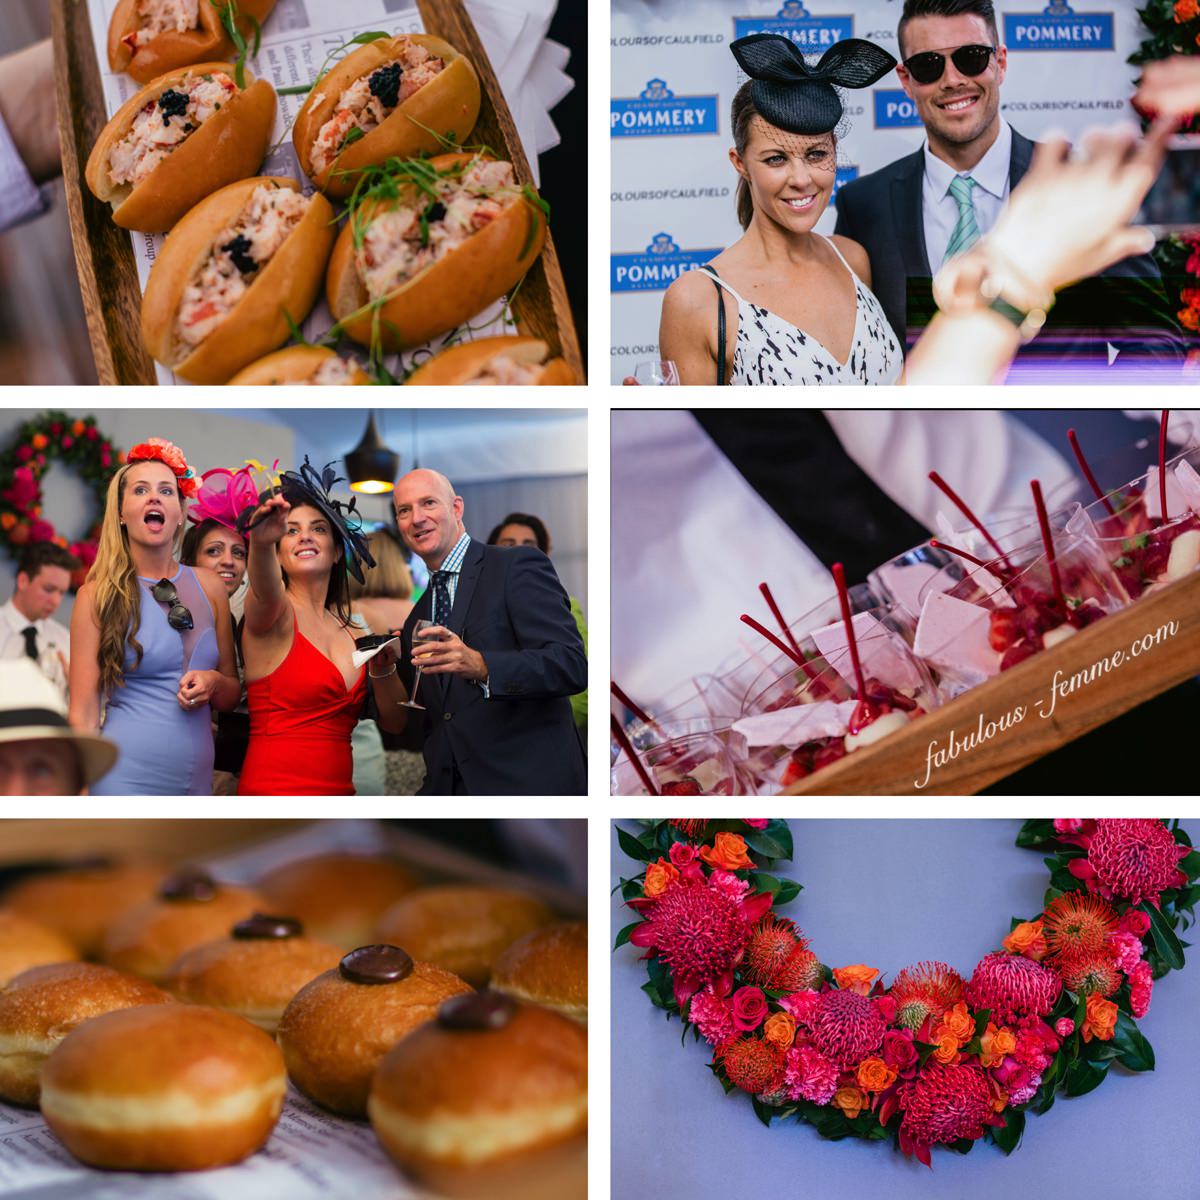 the best of melbourne racing in Caulfield  - The stylish start of the Melbourne Spring Arcing season